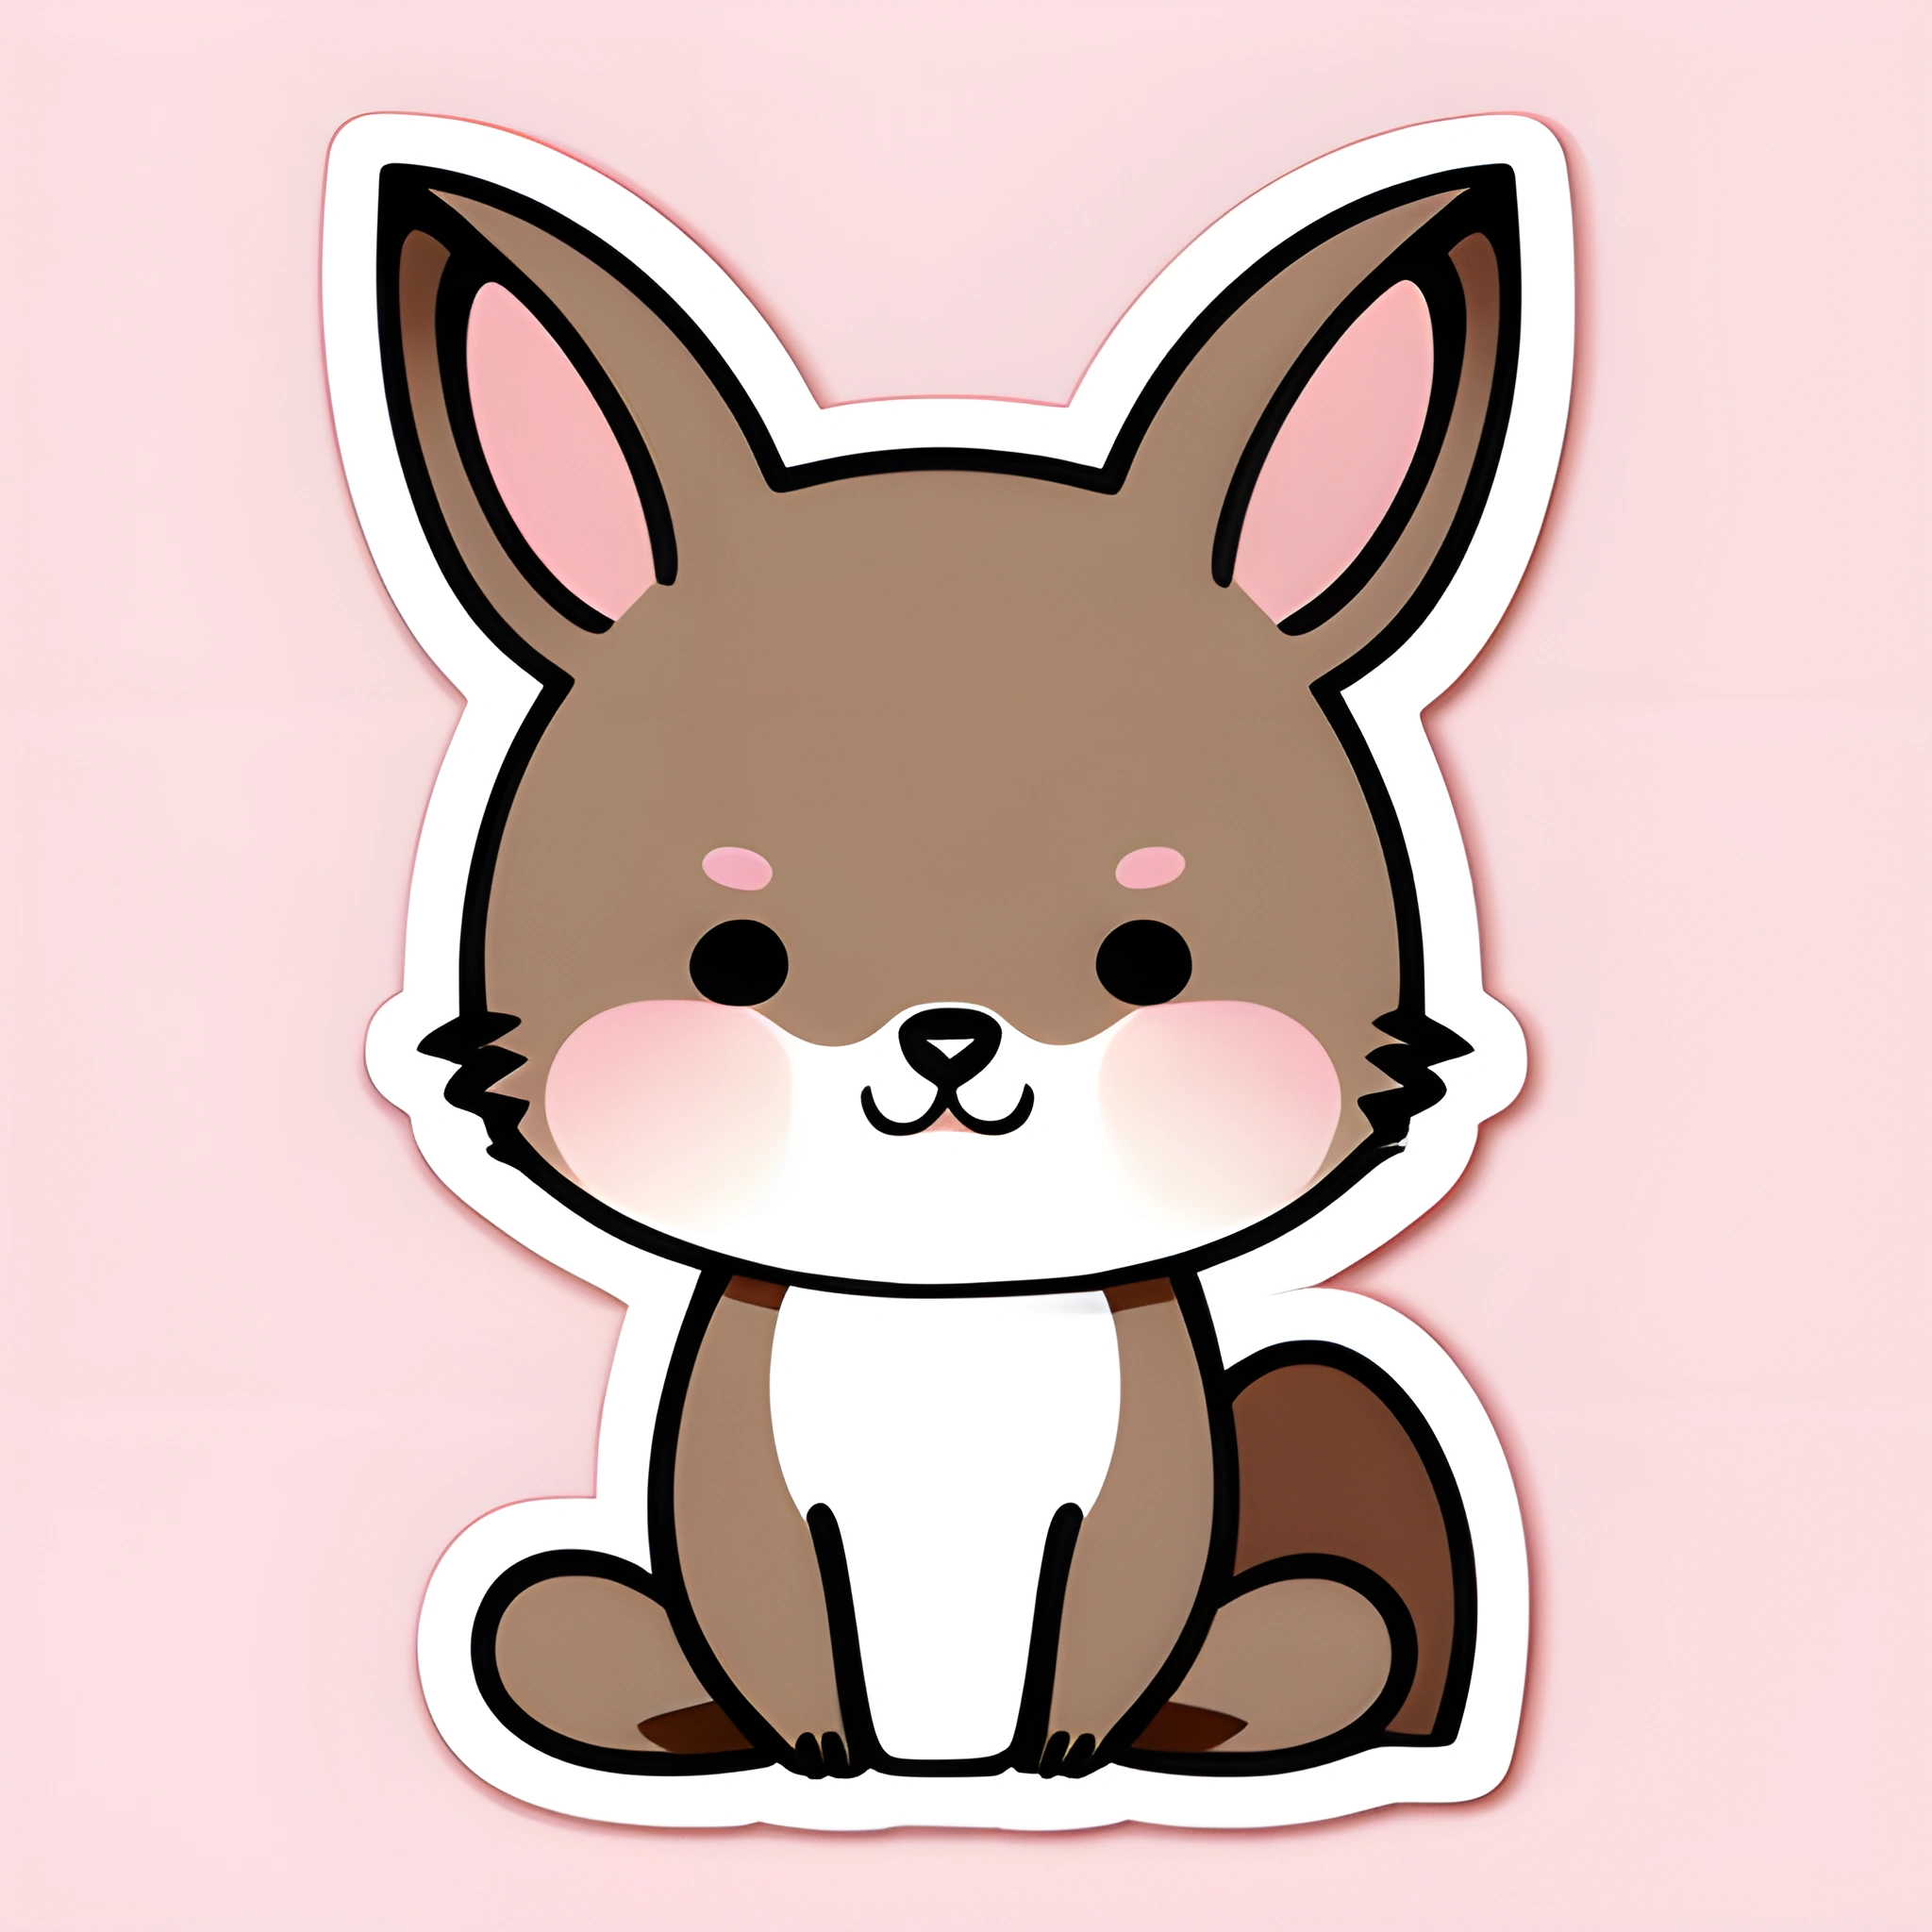 a sticker of a cartoon dog sitting on a pink surface